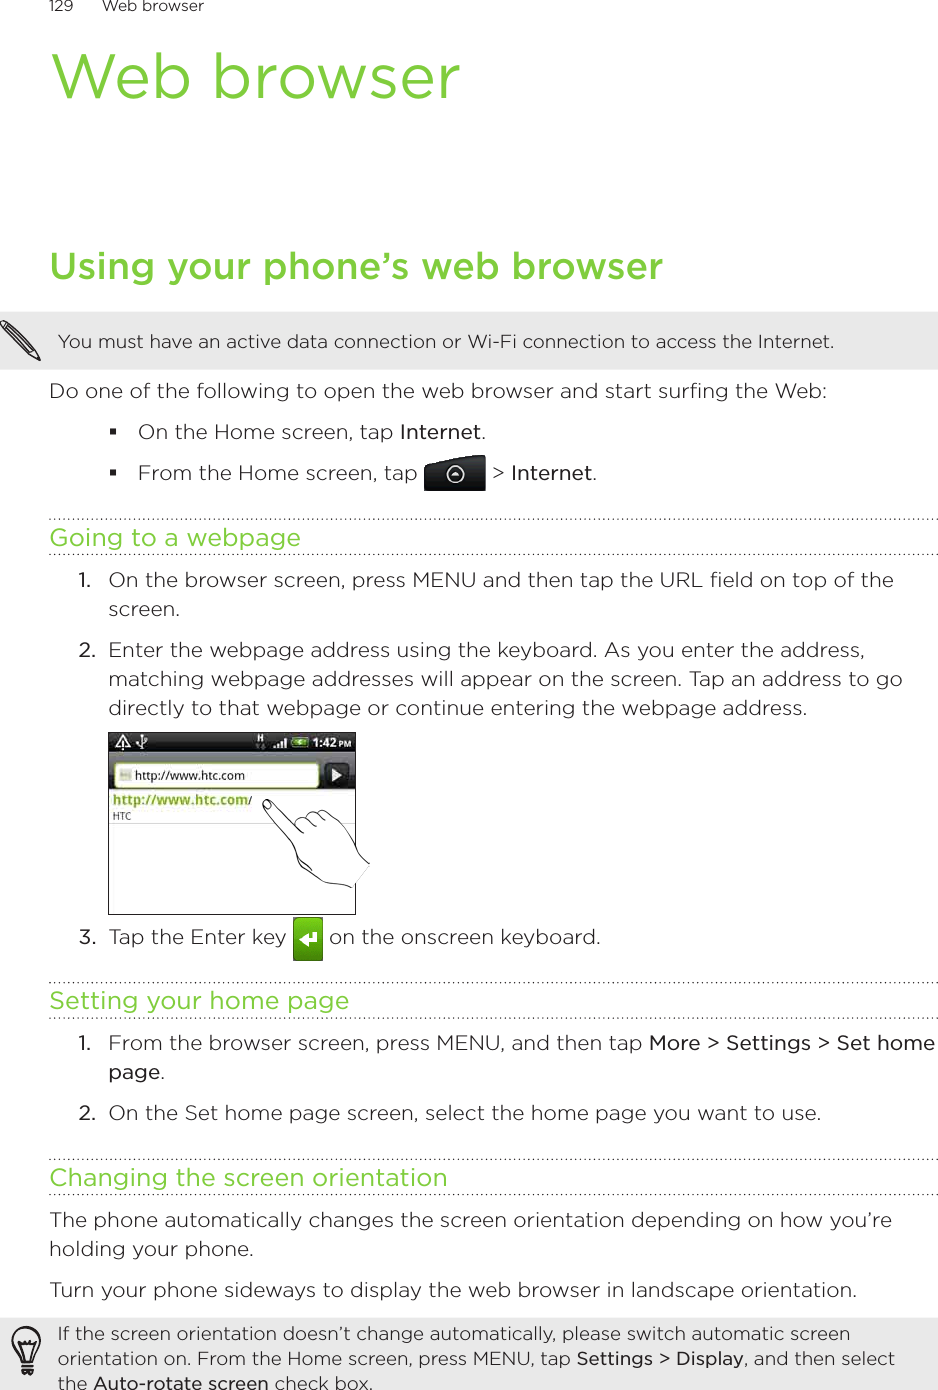 129      Web browser      Web browserUsing your phone’s web browserYou must have an active data connection or Wi-Fi connection to access the Internet.Do one of the following to open the web browser and start surfing the Web:On the Home screen, tap Internet.From the Home screen, tap  &gt; Internet.Going to a webpageOn the browser screen, press MENU and then tap the URL field on top of the screen.2.  Enter the webpage address using the keyboard. As you enter the address, matching webpage addresses will appear on the screen. Tap an address to go directly to that webpage or continue entering the webpage address.3.  Tap the Enter key   on the onscreen keyboard.Setting your home pageFrom the browser screen, press MENU, and then tap More &gt; Settings &gt; Set home page.On the Set home page screen, select the home page you want to use.Changing the screen orientationThe phone automatically changes the screen orientation depending on how you’re holding your phone. Turn your phone sideways to display the web browser in landscape orientation.If the screen orientation doesn’t change automatically, please switch automatic screen orientation on. From the Home screen, press MENU, tap Settings &gt; Display, and then select the Auto-rotate screen check box.1.1.2.